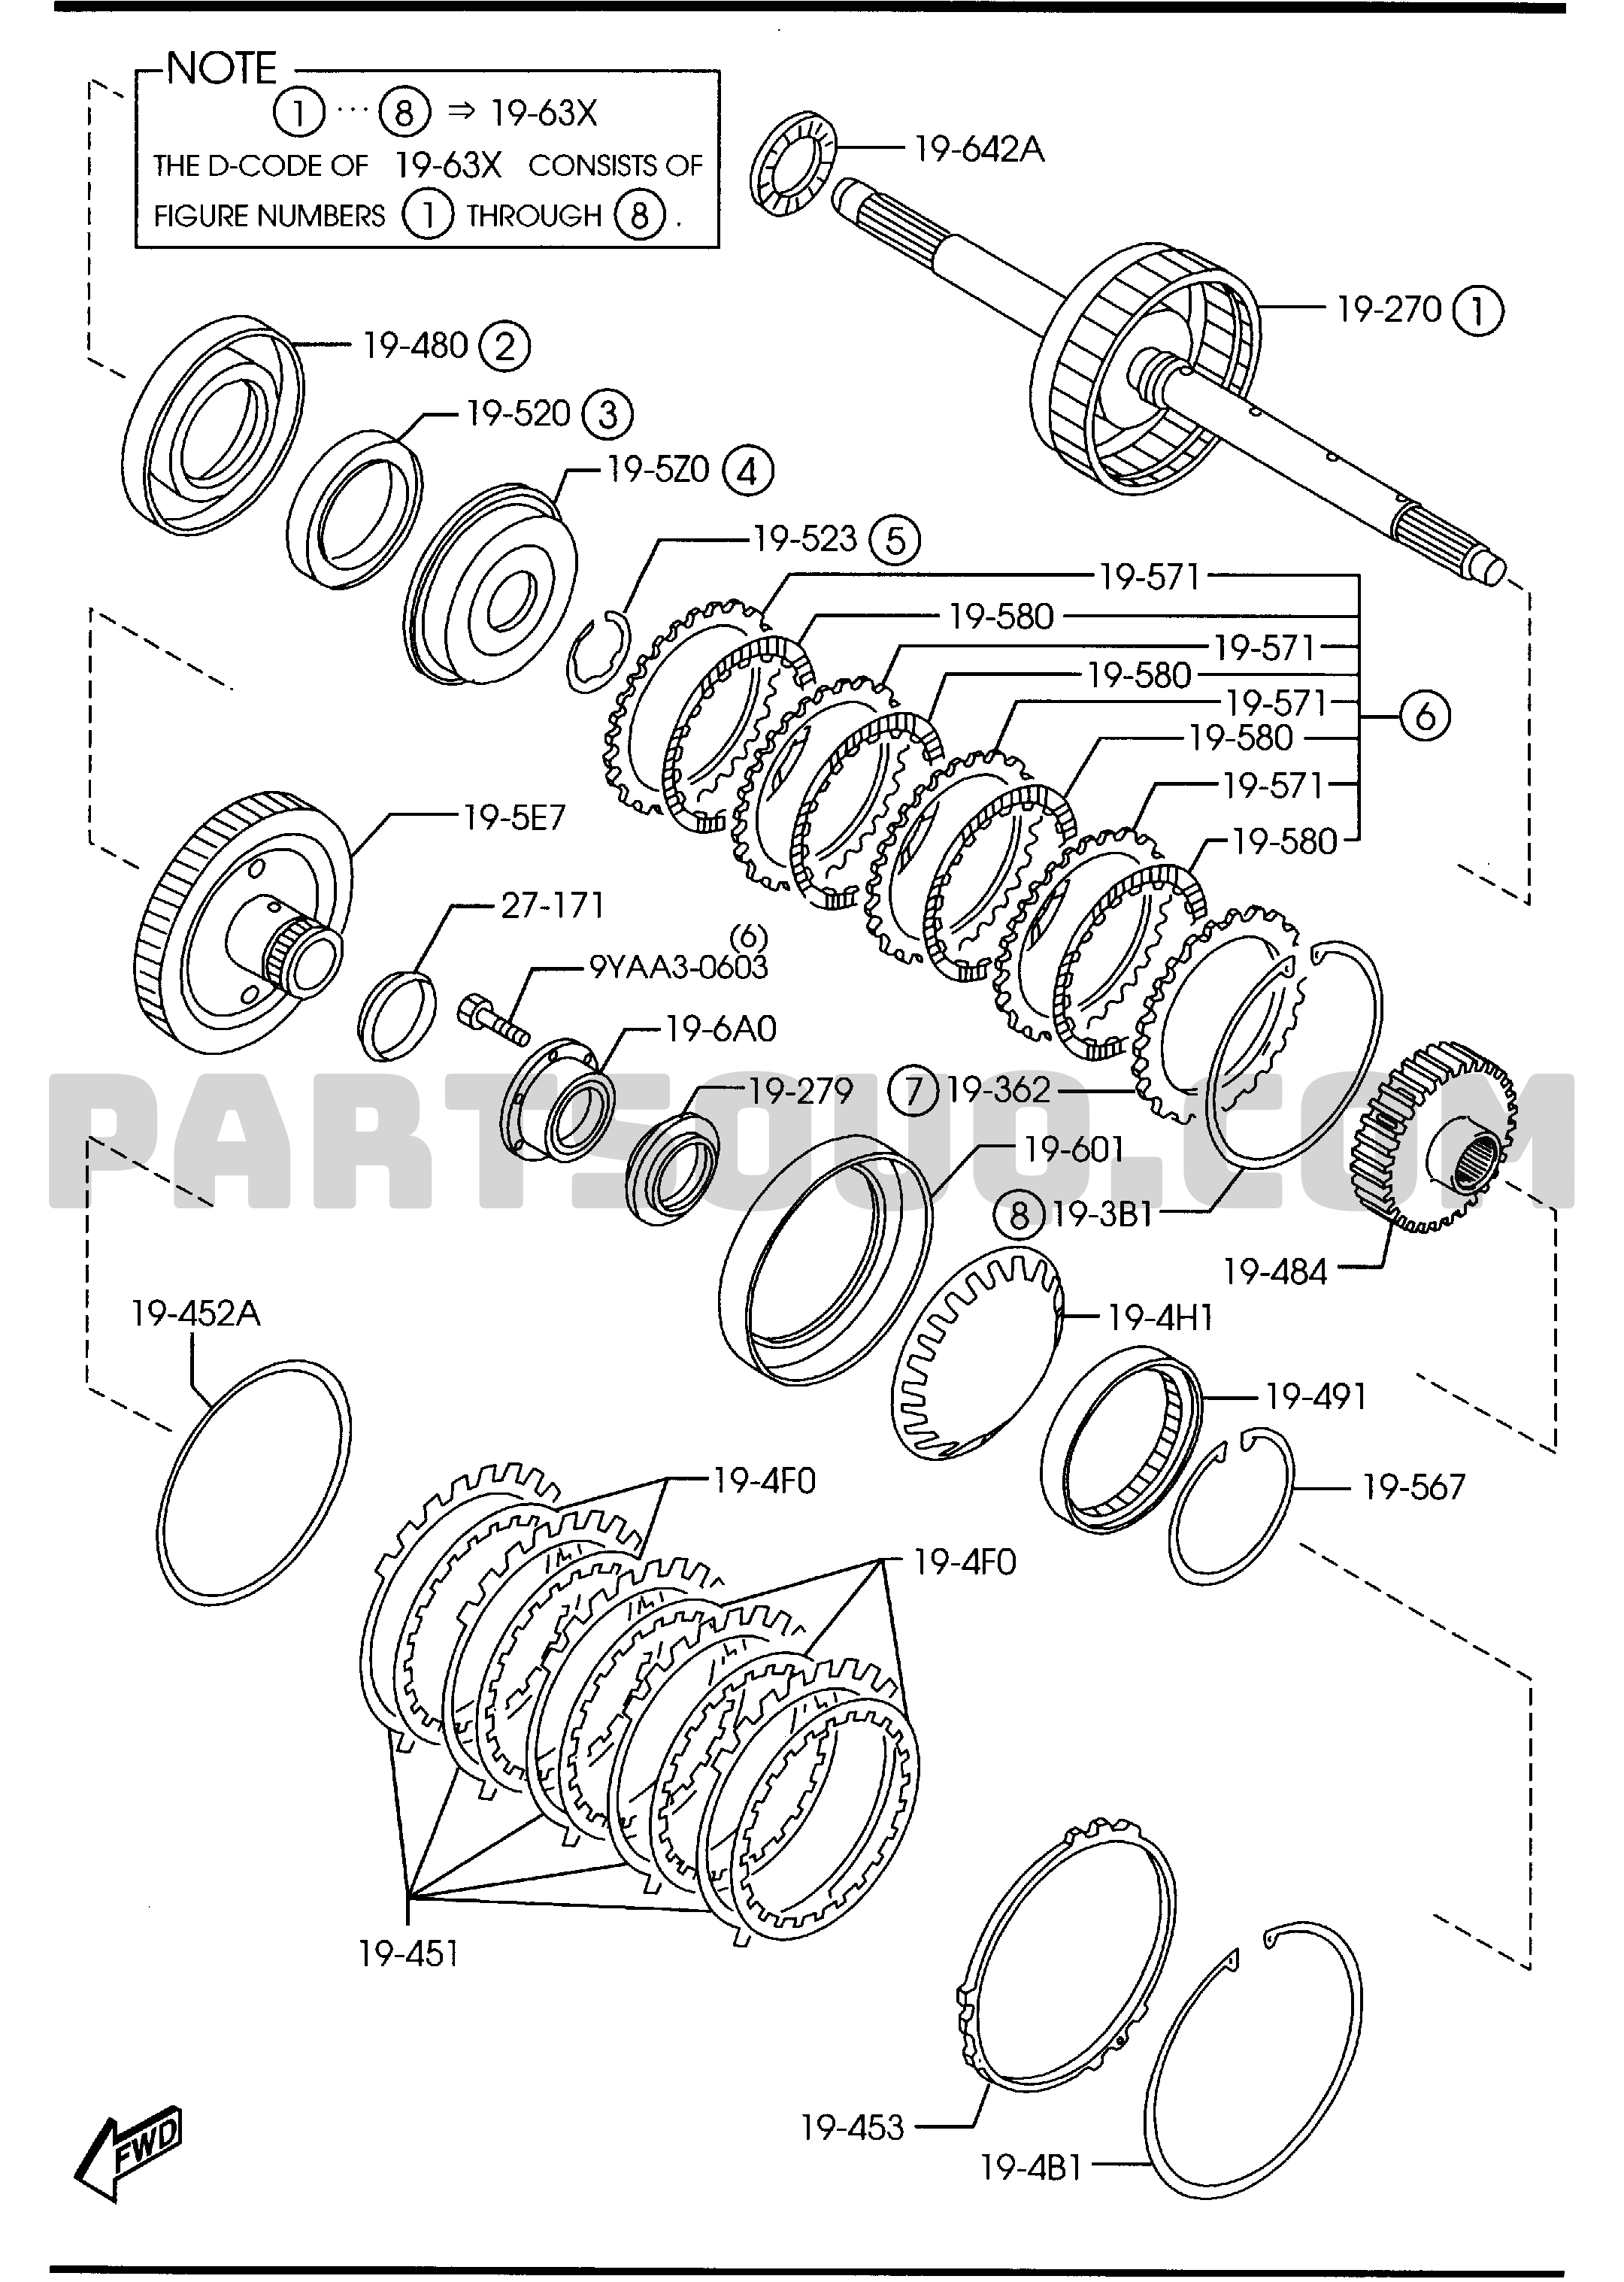 1940A - AUTOMATIC TRANSMISSION GOVERNOR, LOW & REVERSE PISTON 01 